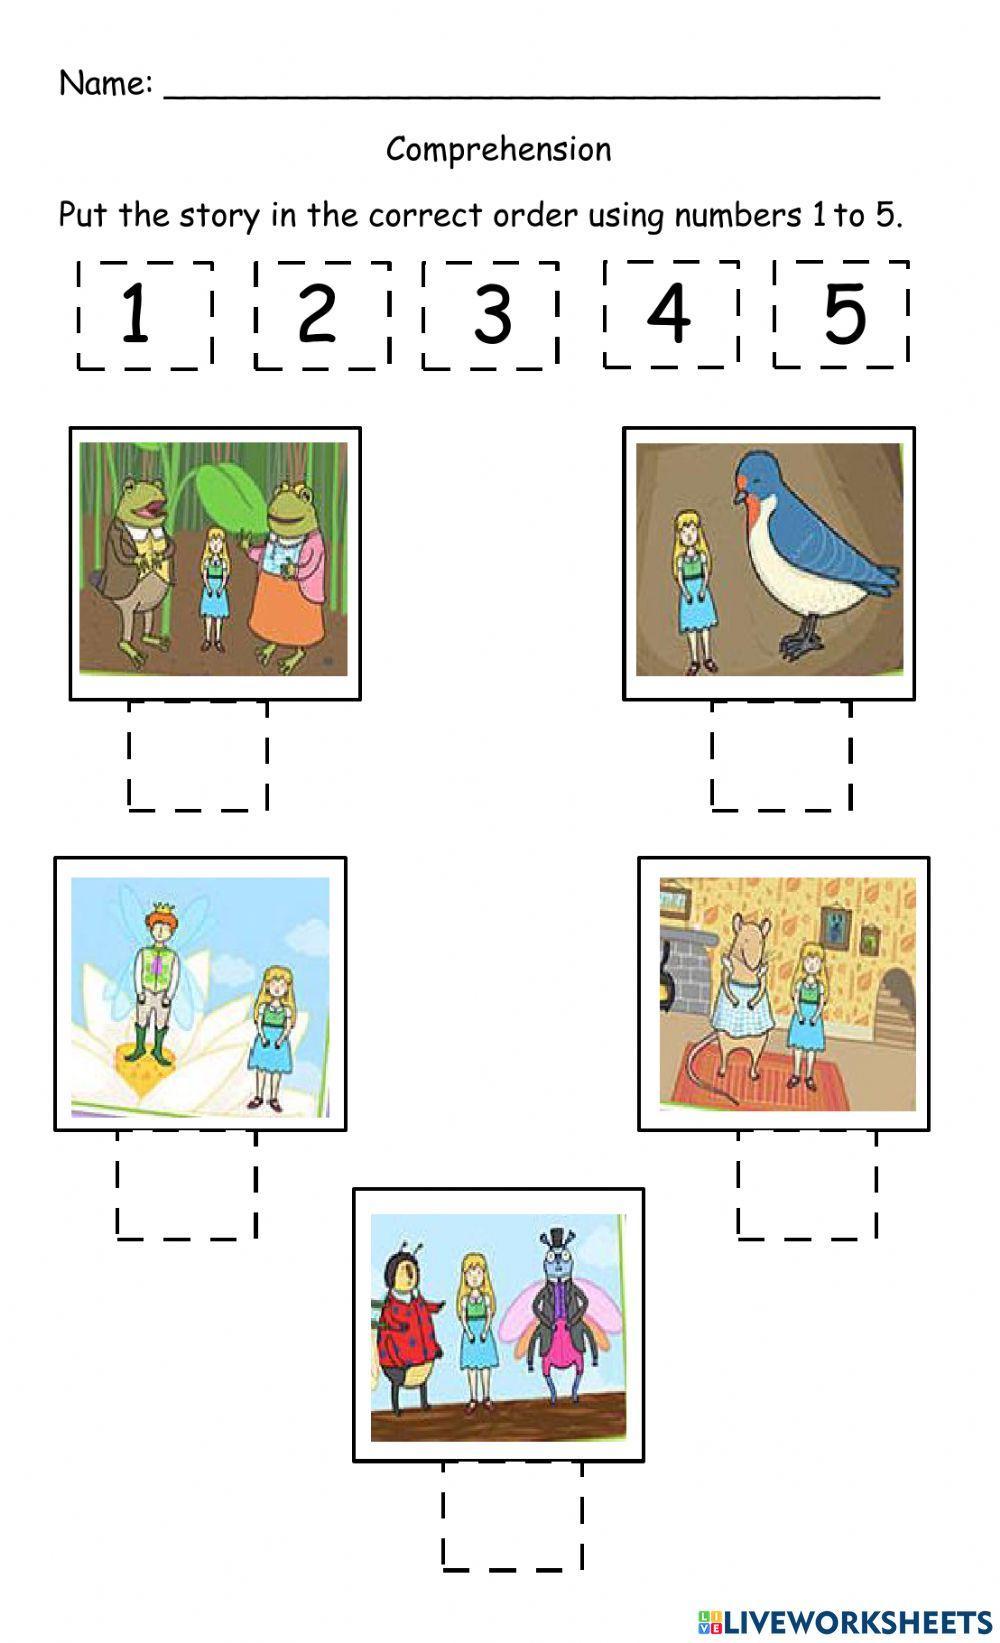 Sequencing Events - Thumbelina